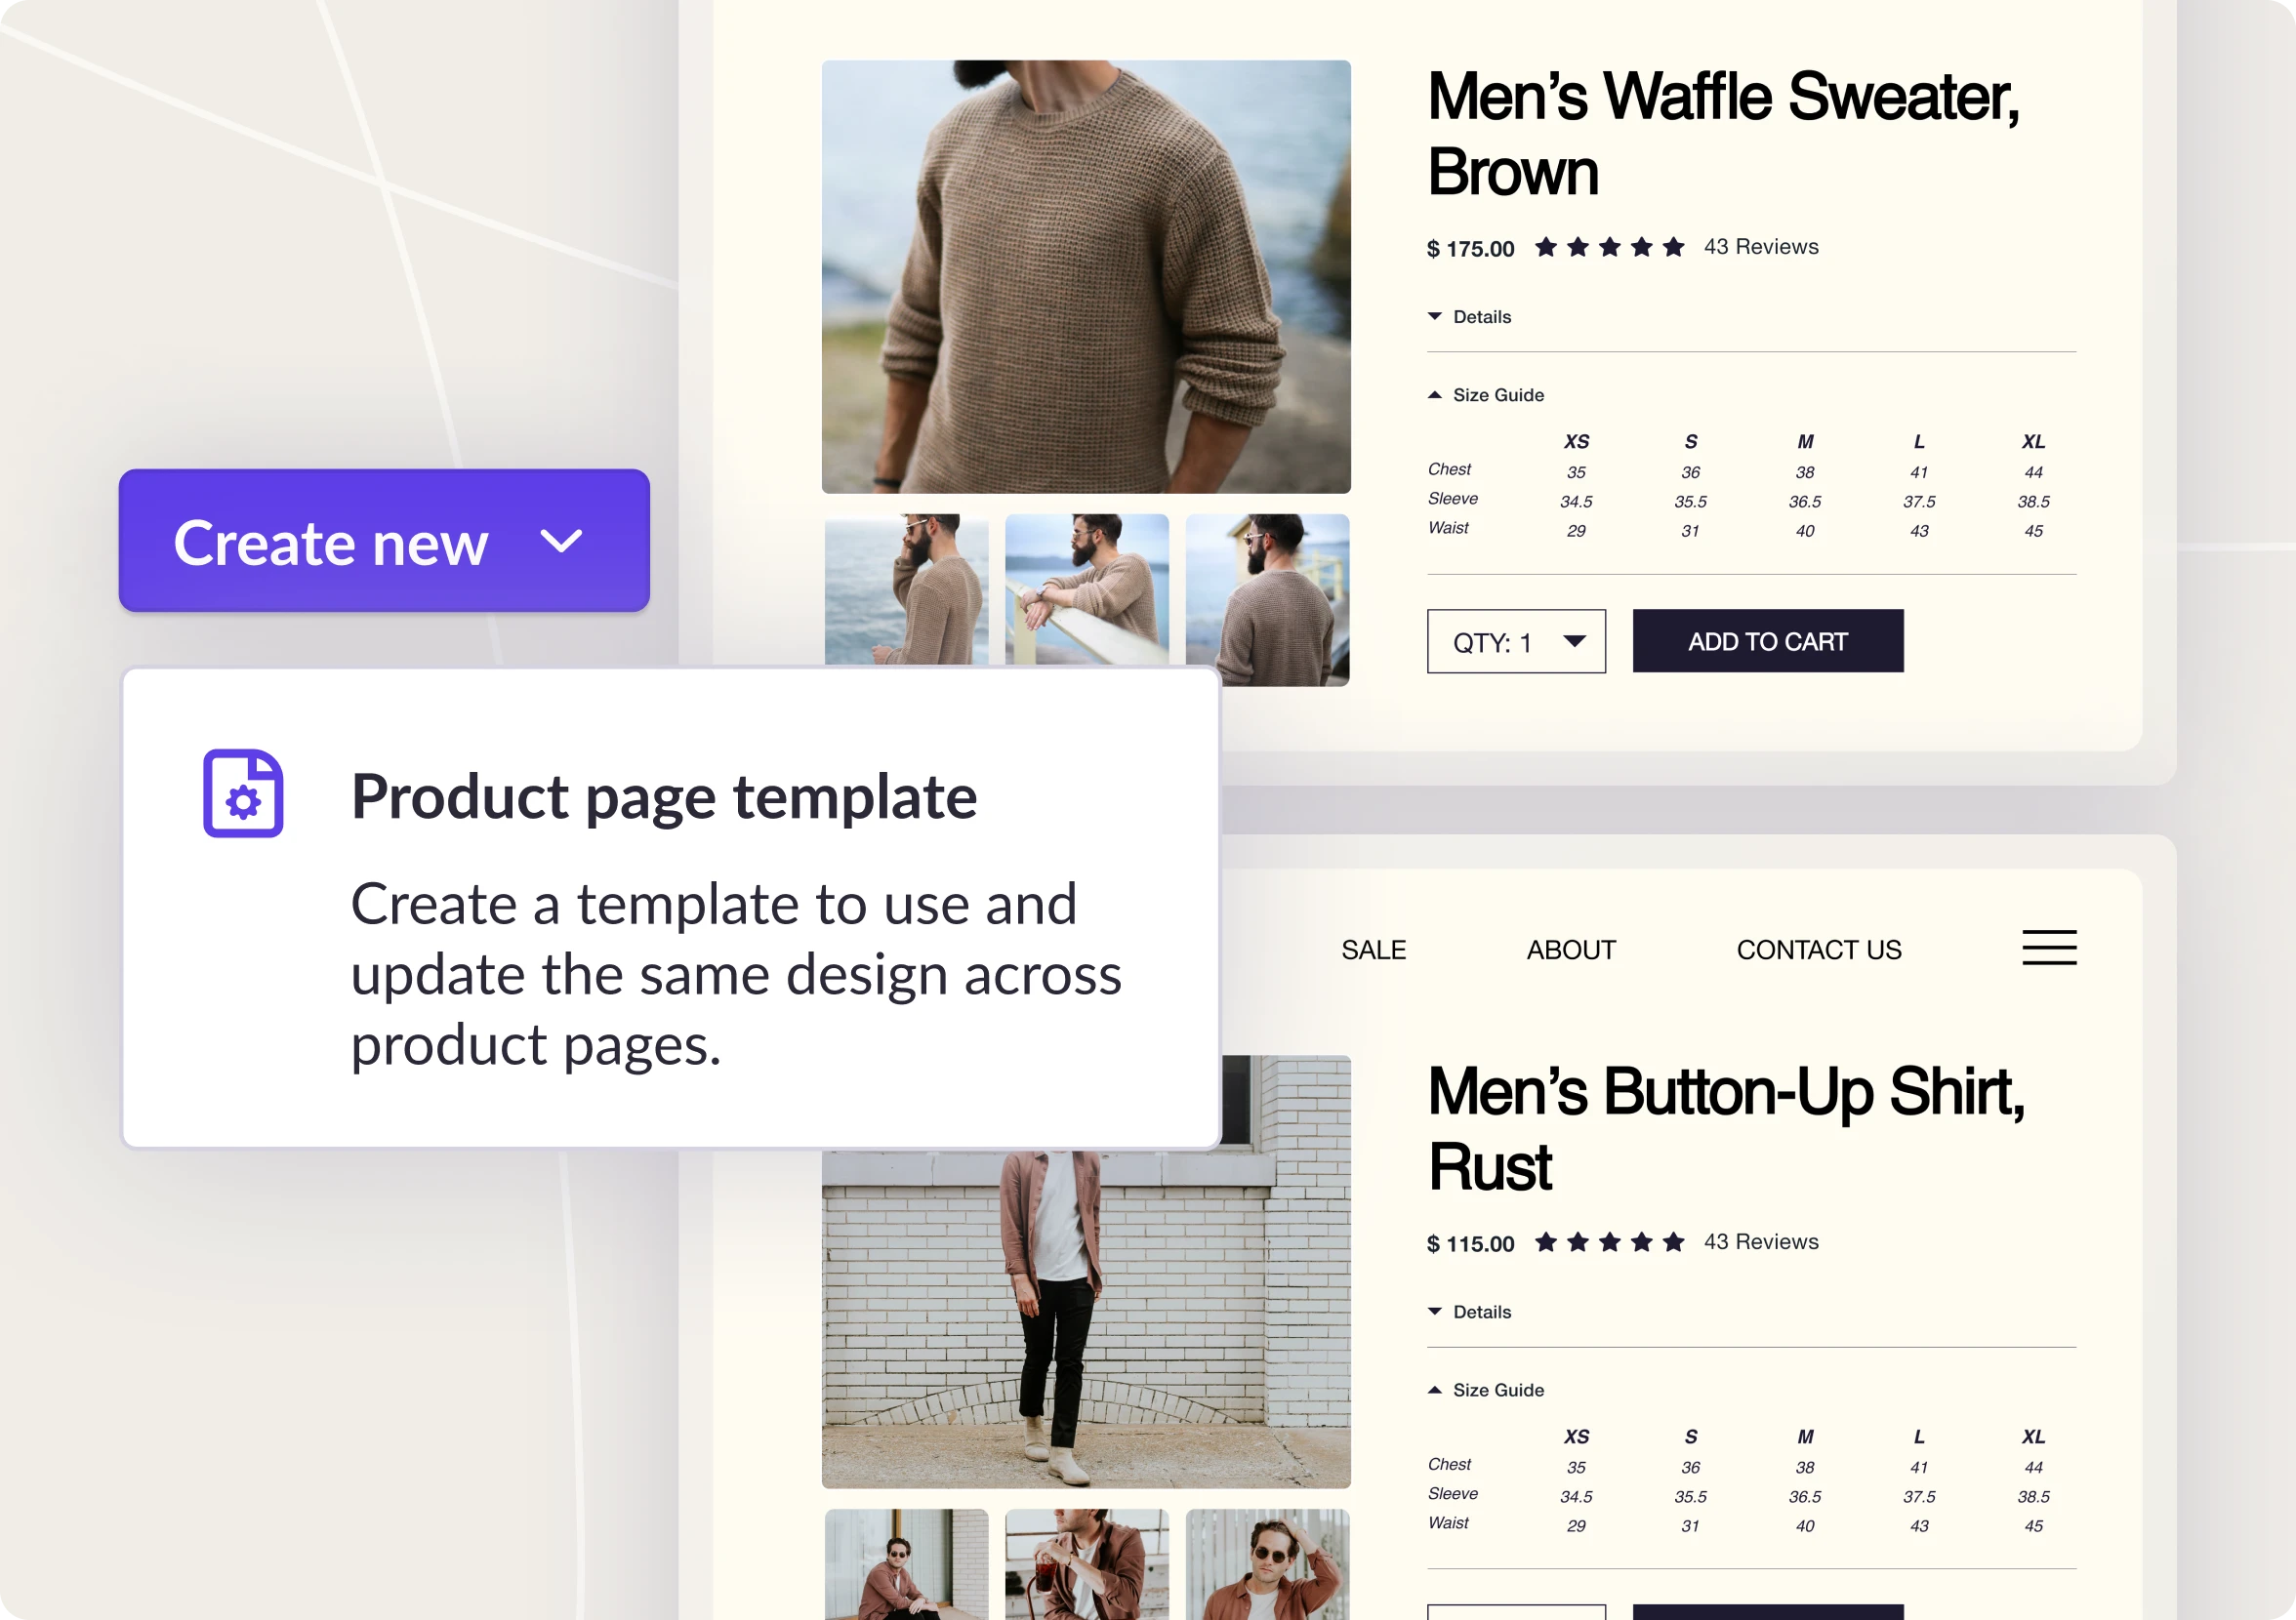 Two product pages with size charts utilizing the same template